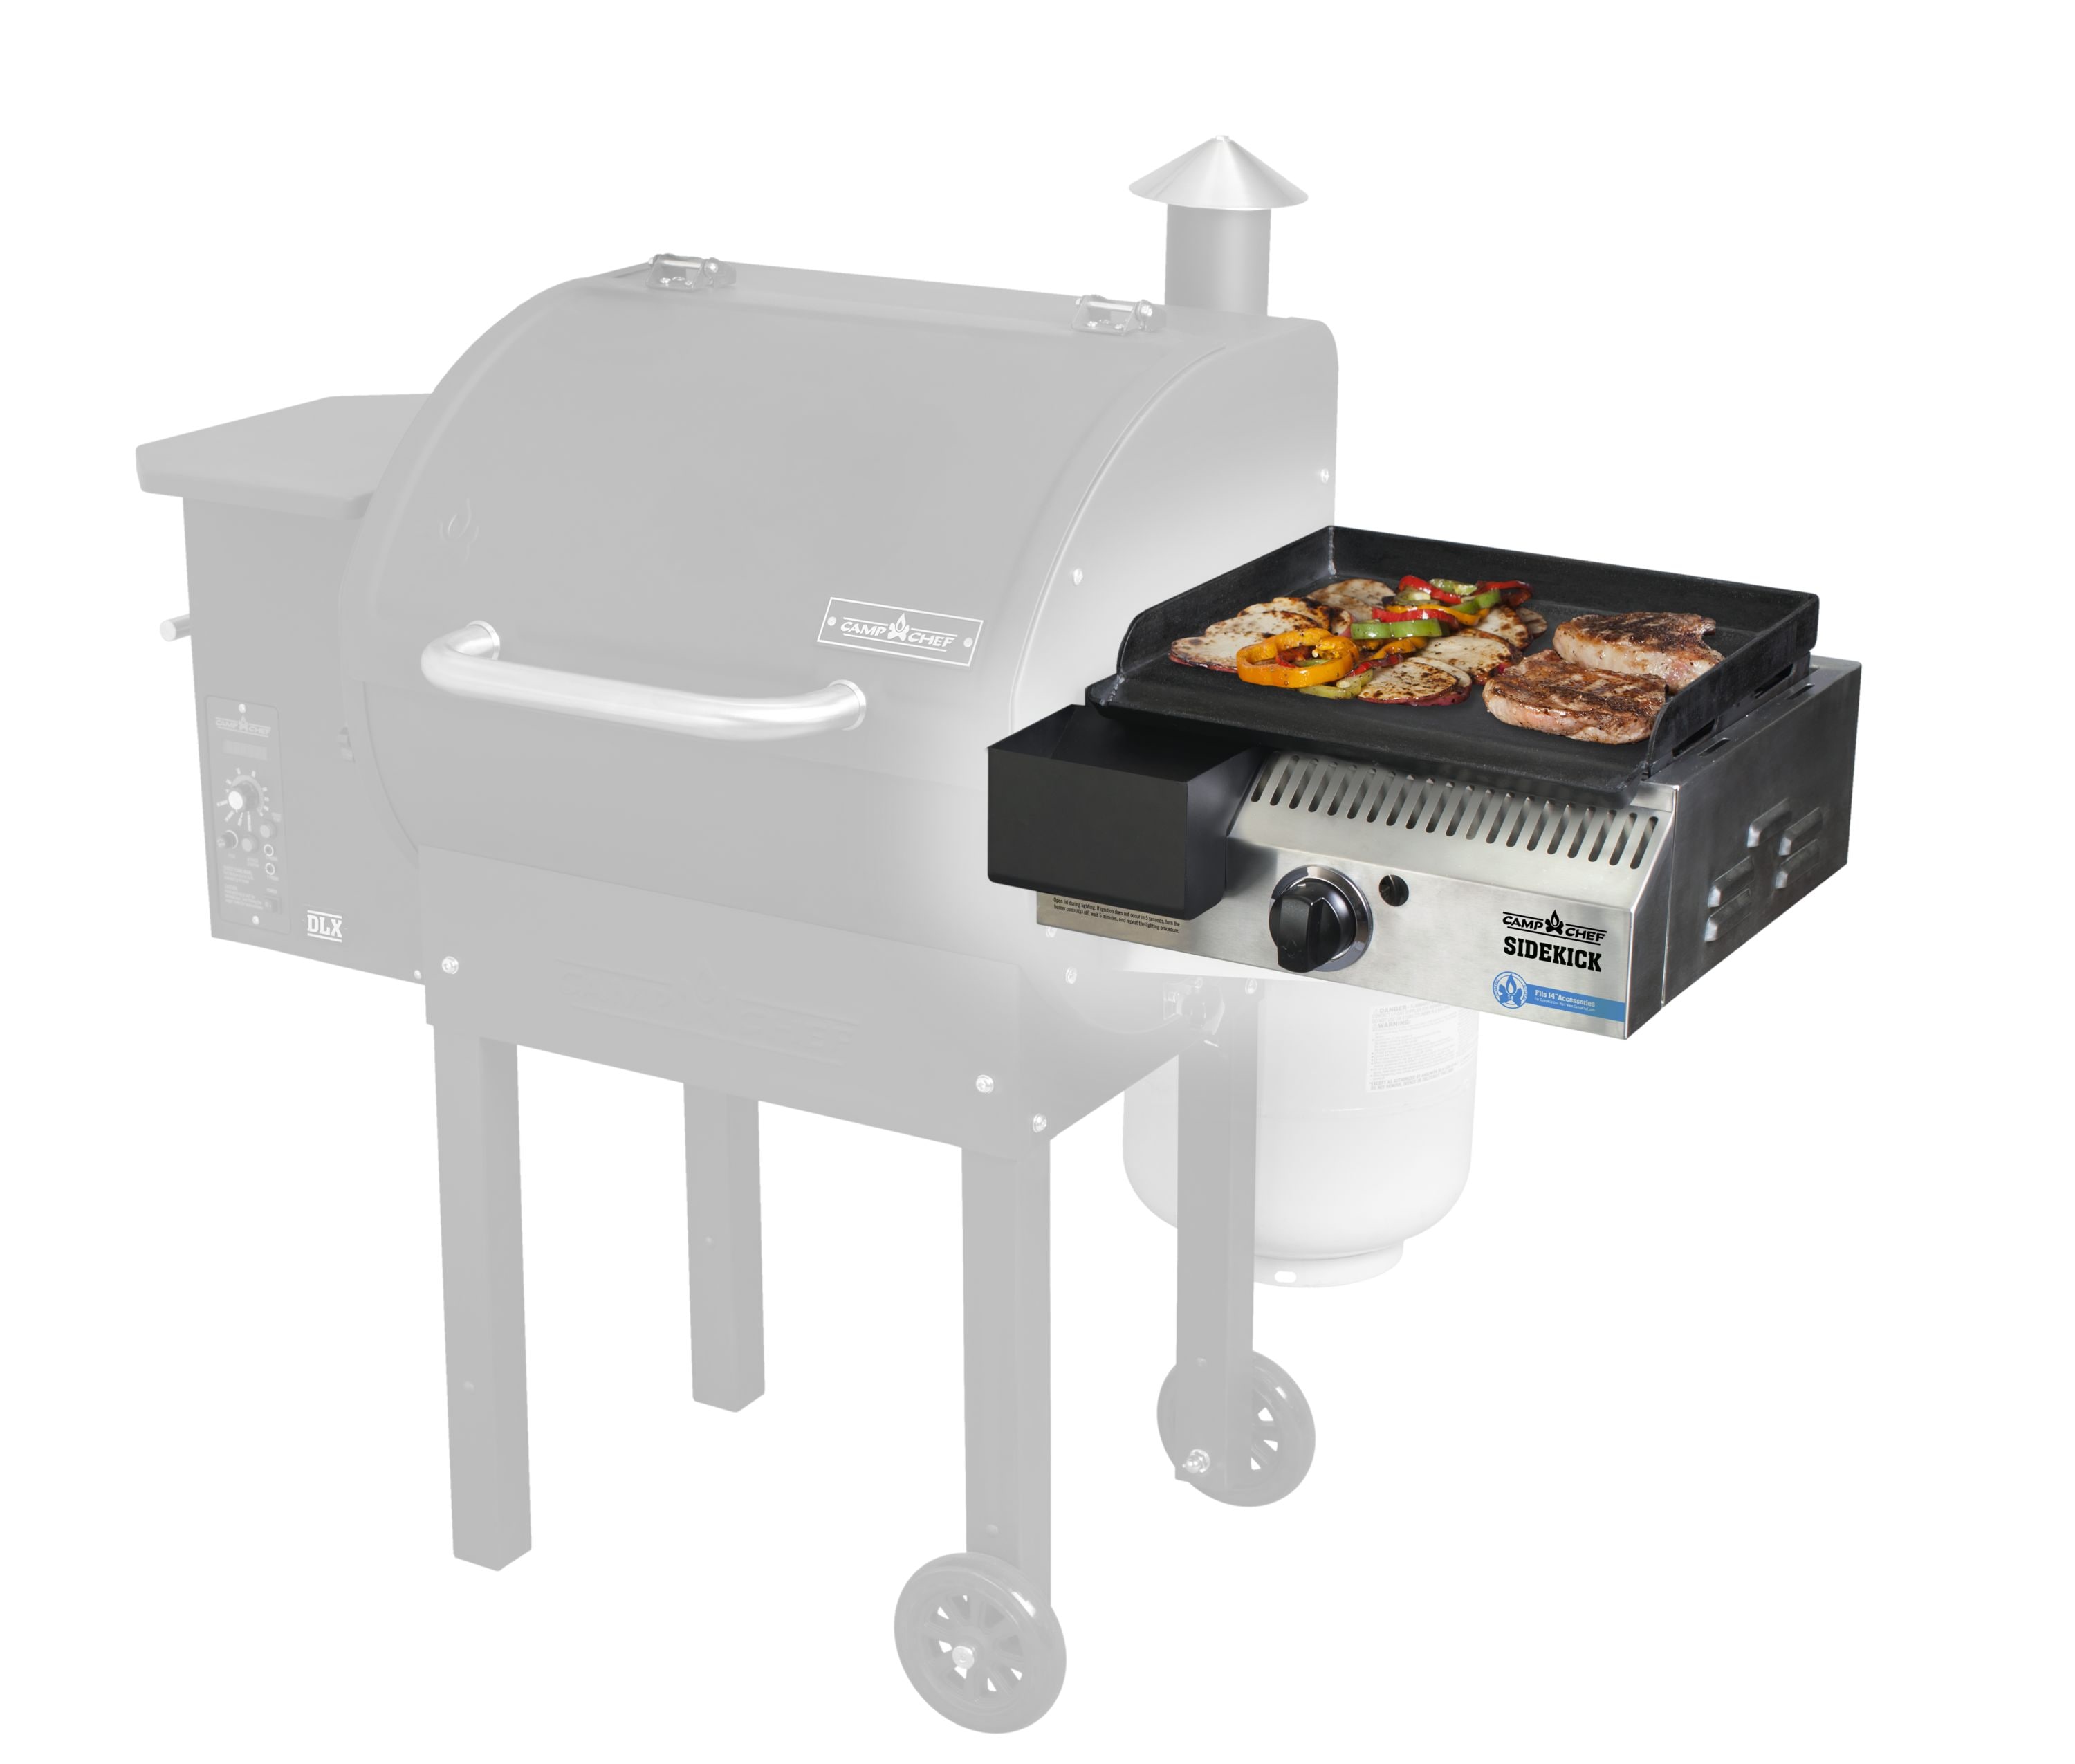 Camp Chef 24 Reversible Pre-Seasoned Cast Iron Grill/Griddle